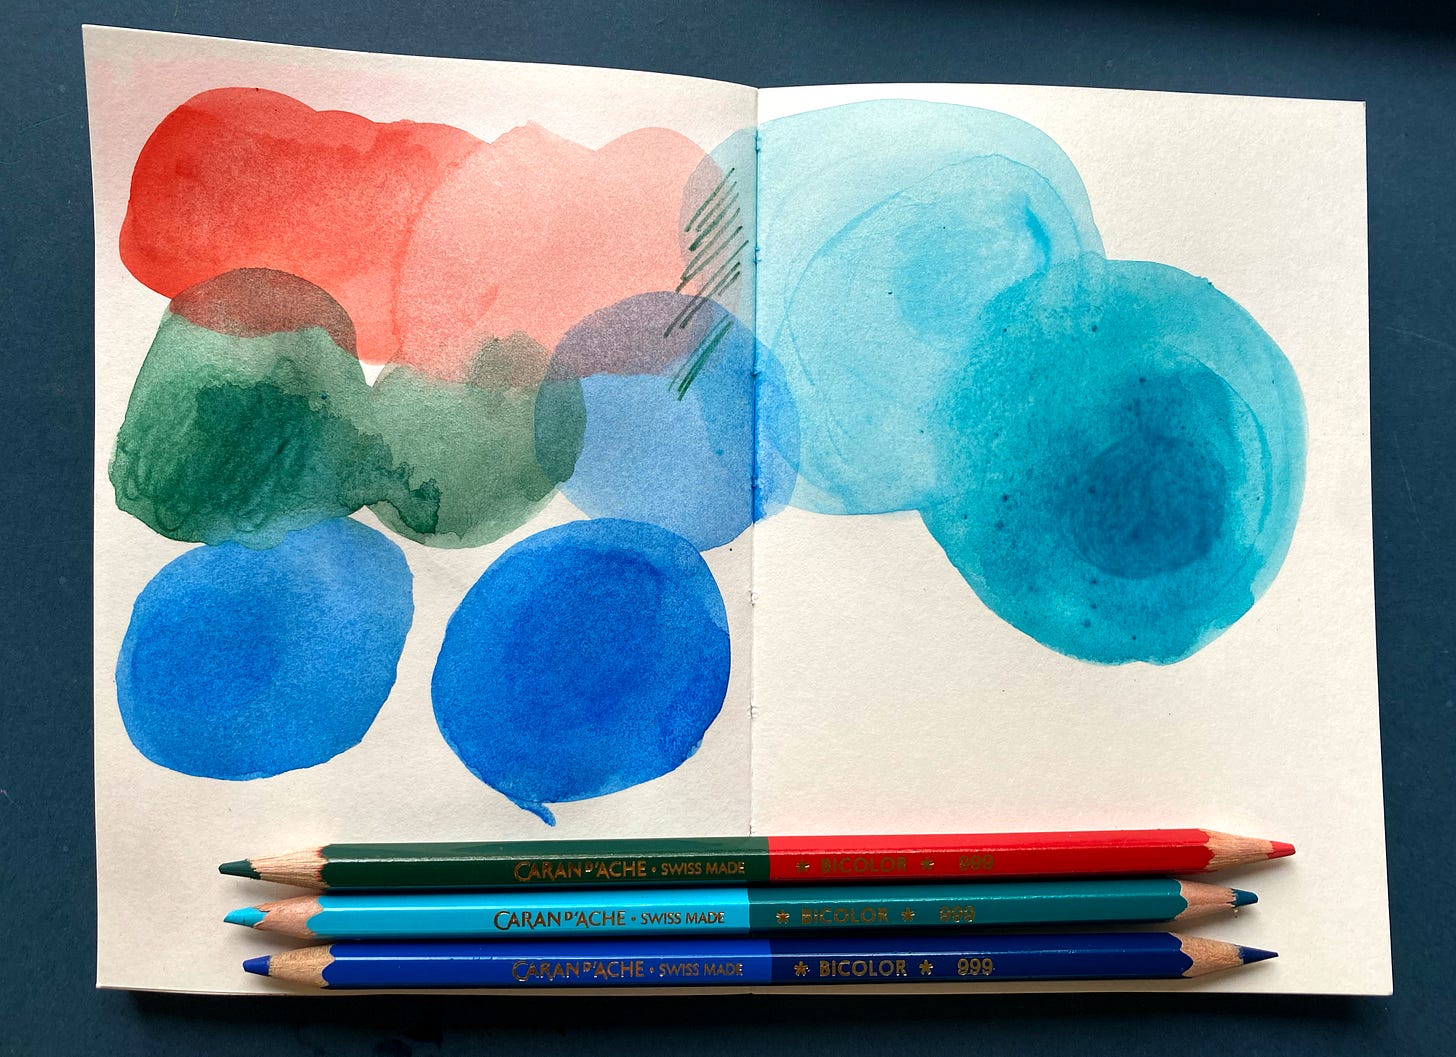 sketchbook page open showing colour swatches of tones of blue, green and vermillion. Water soluble pencils shown next to the page.